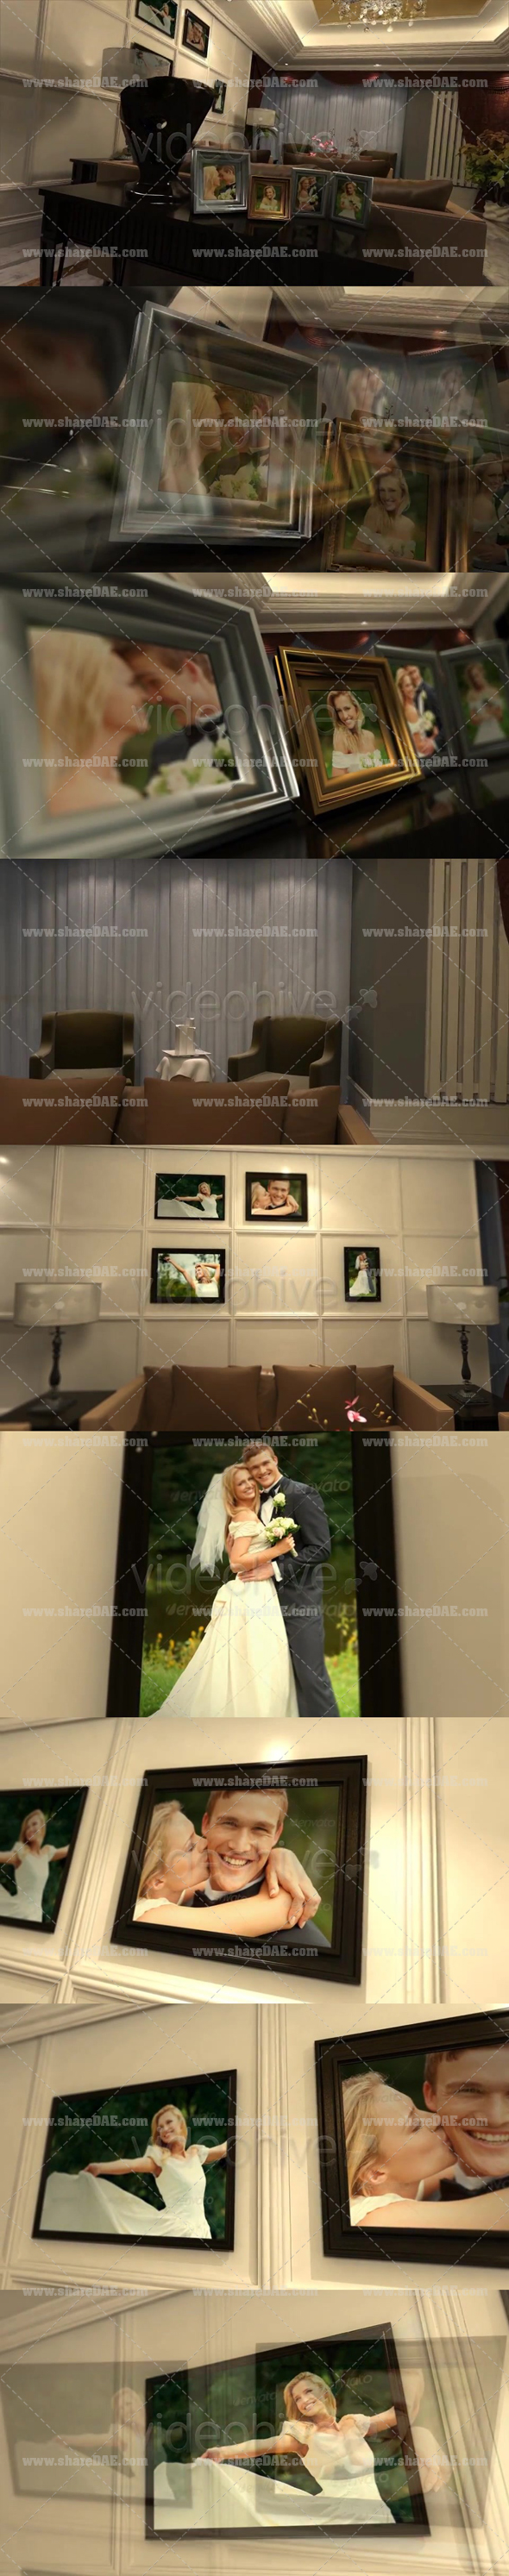 Videohive - The Wall Of Love 3875479 - Free Download 